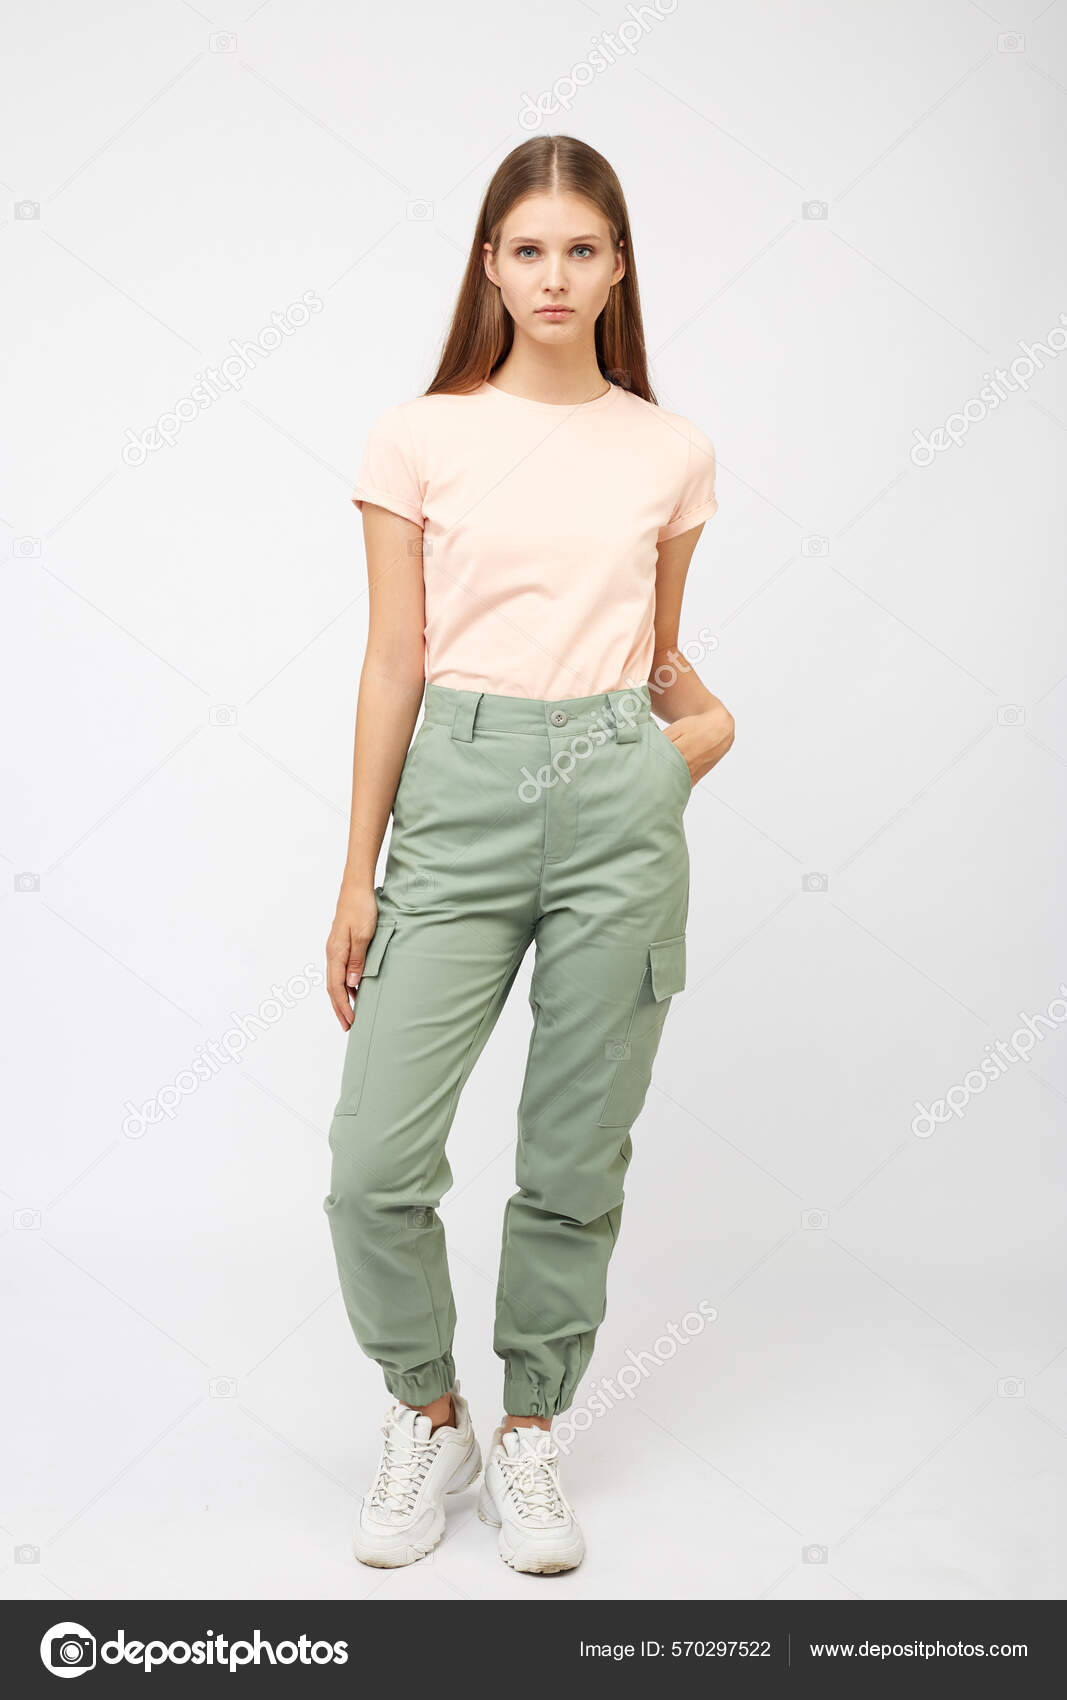 2,492 Cargo Pants Women Royalty-Free Photos and Stock Images